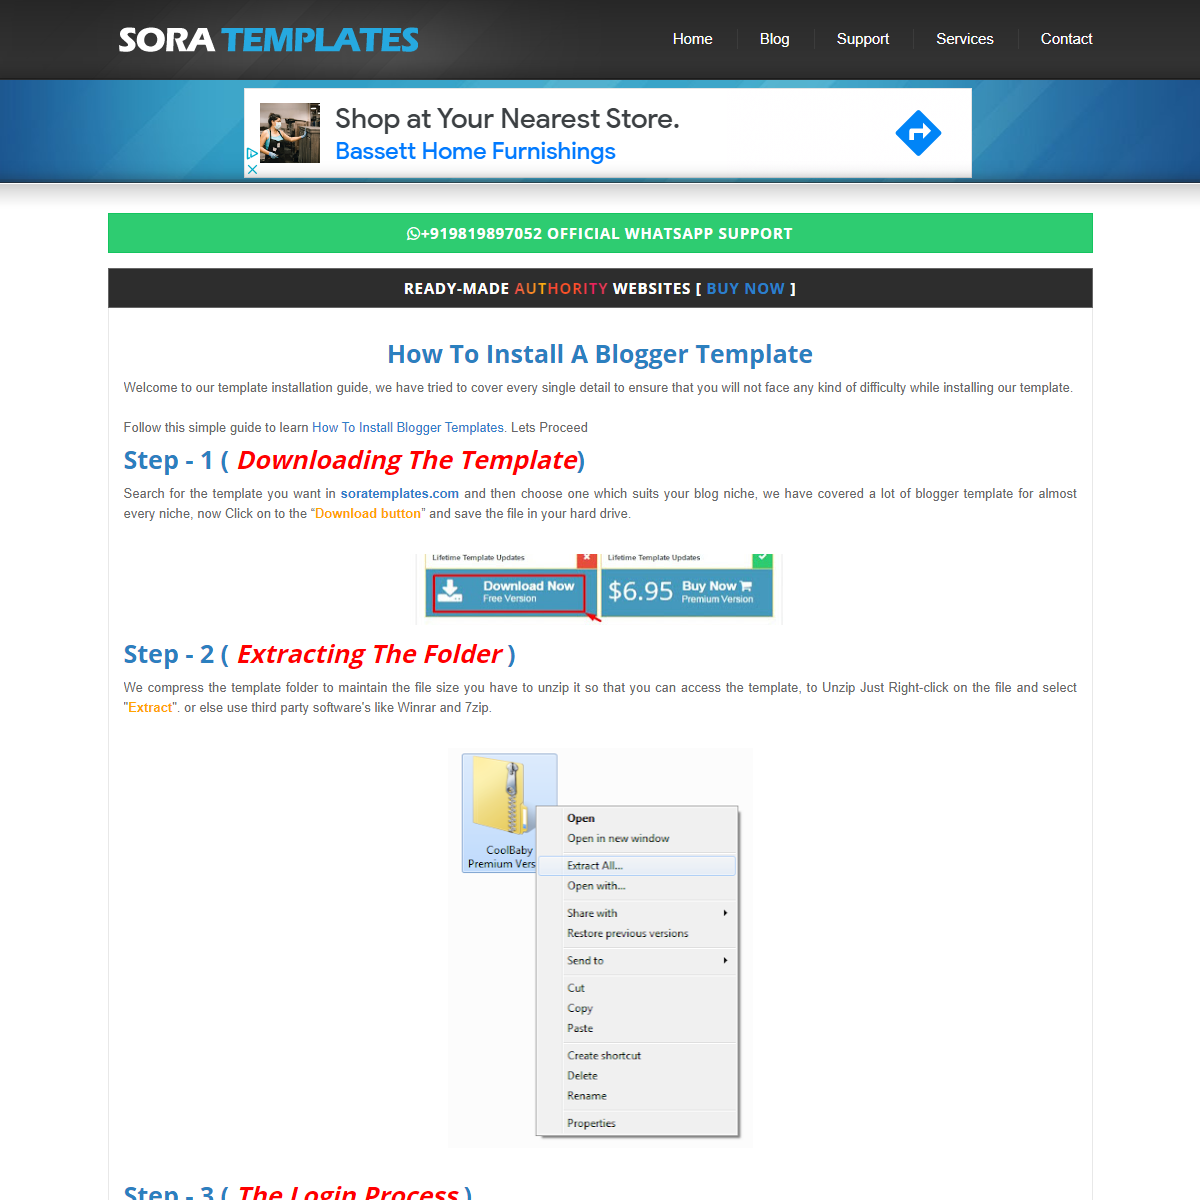 A complete backup of https://www.soratemplates.com/p/how-to-install-blogger-template.html